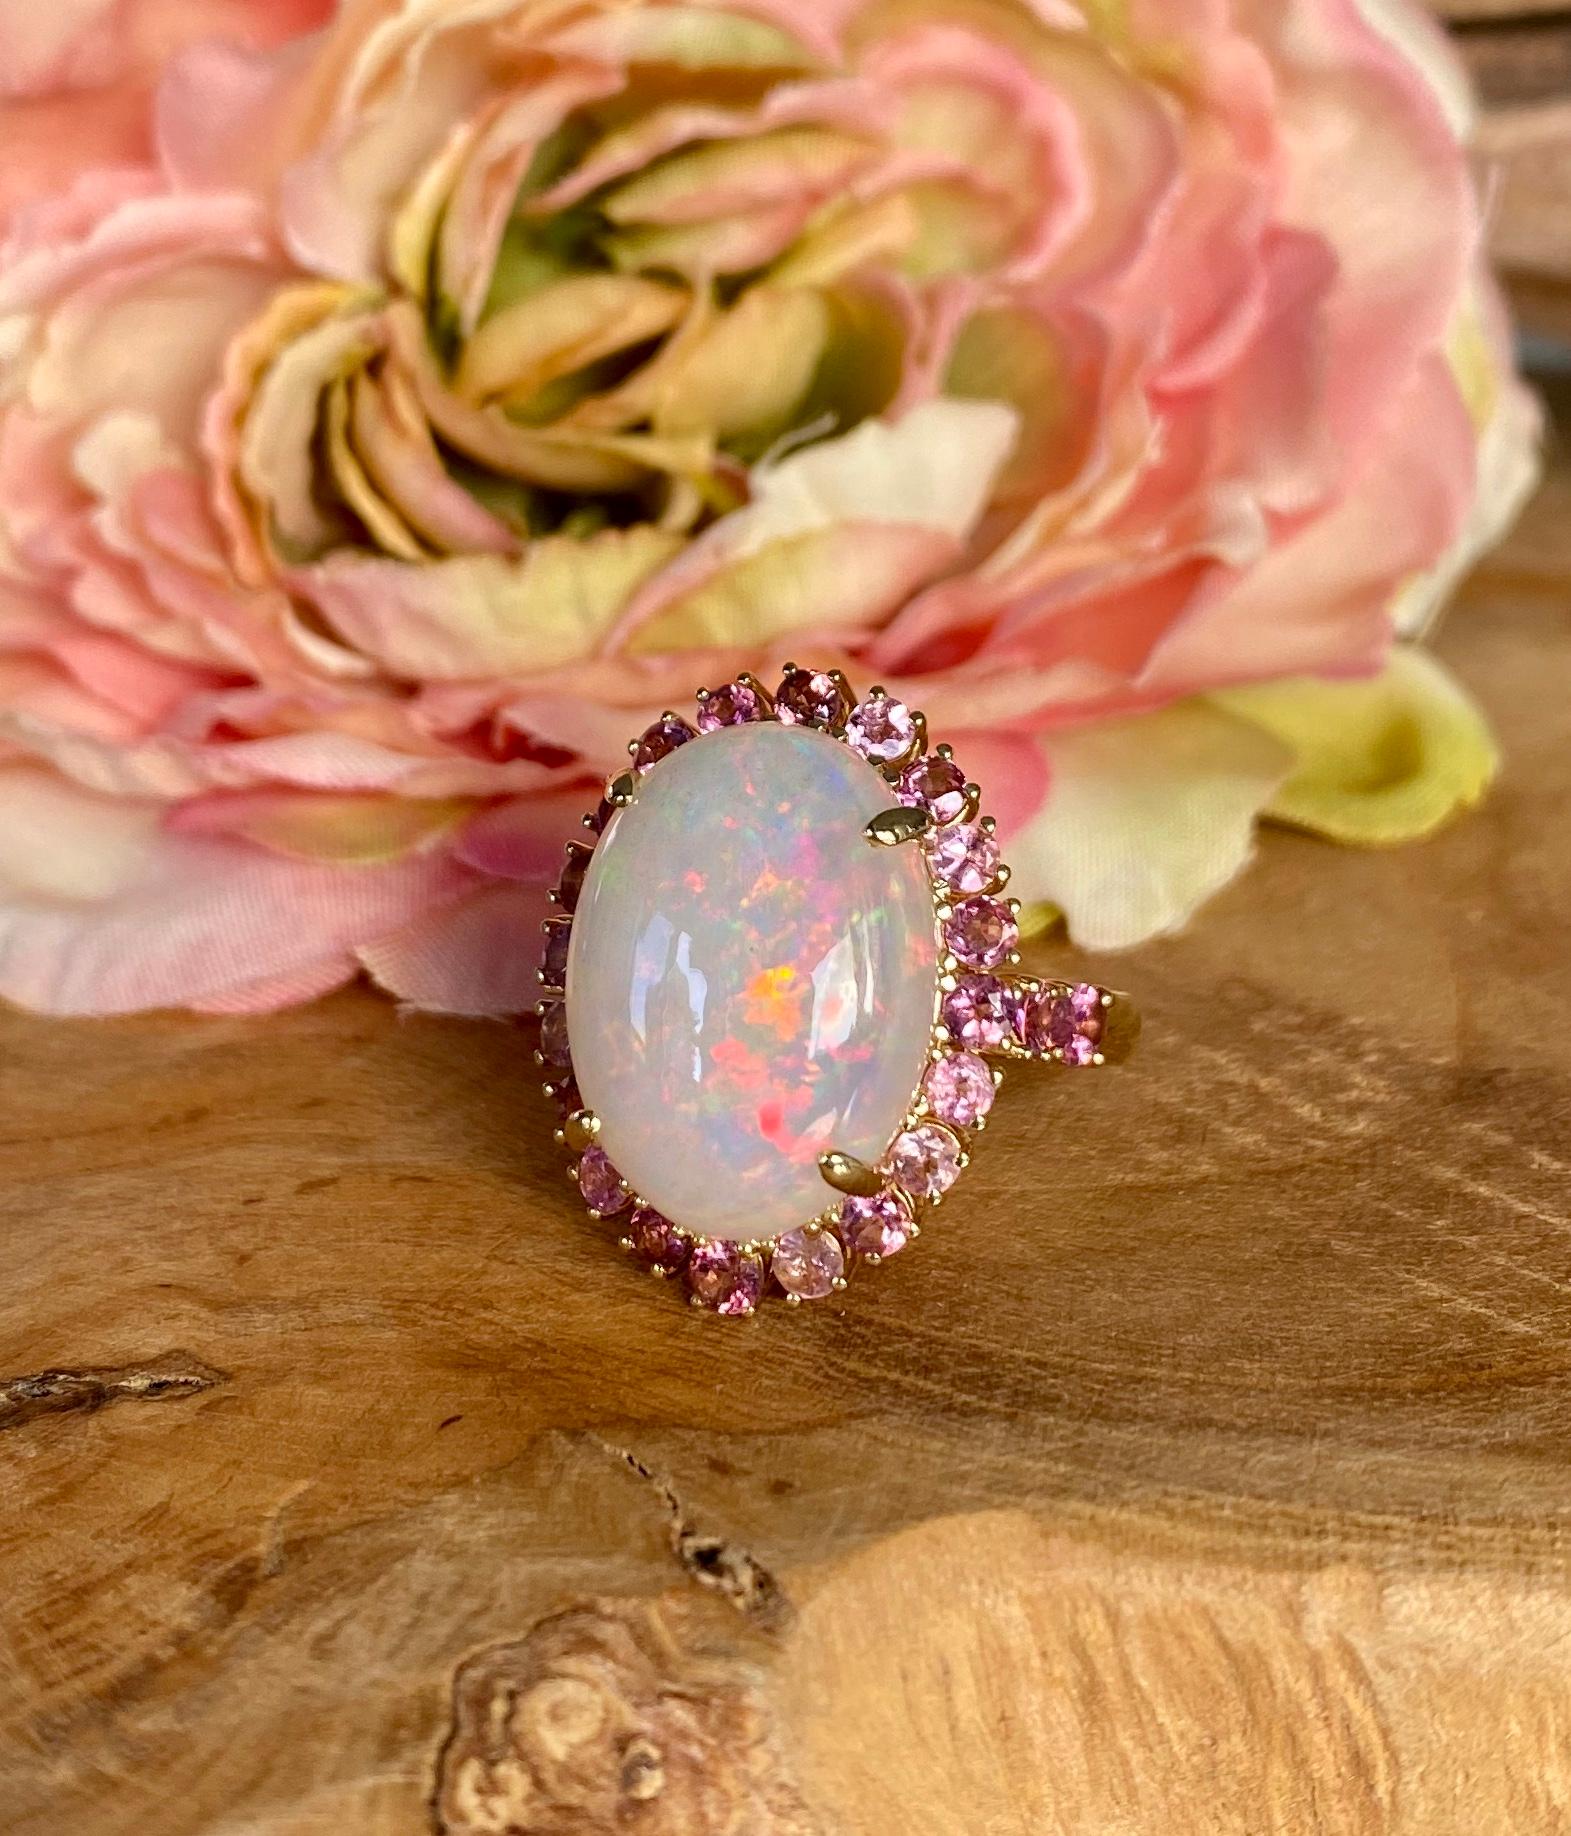 Joon Han one-of-a-kind cocktail ring of an oval Ethiopian opal surrounded by multi-pink tourmalines, handcrafted in 18 karat yellow gold. US size 6.

This stunning rainbow-hued opal ring comes to life when worn, encircled by rich multi-hued pink